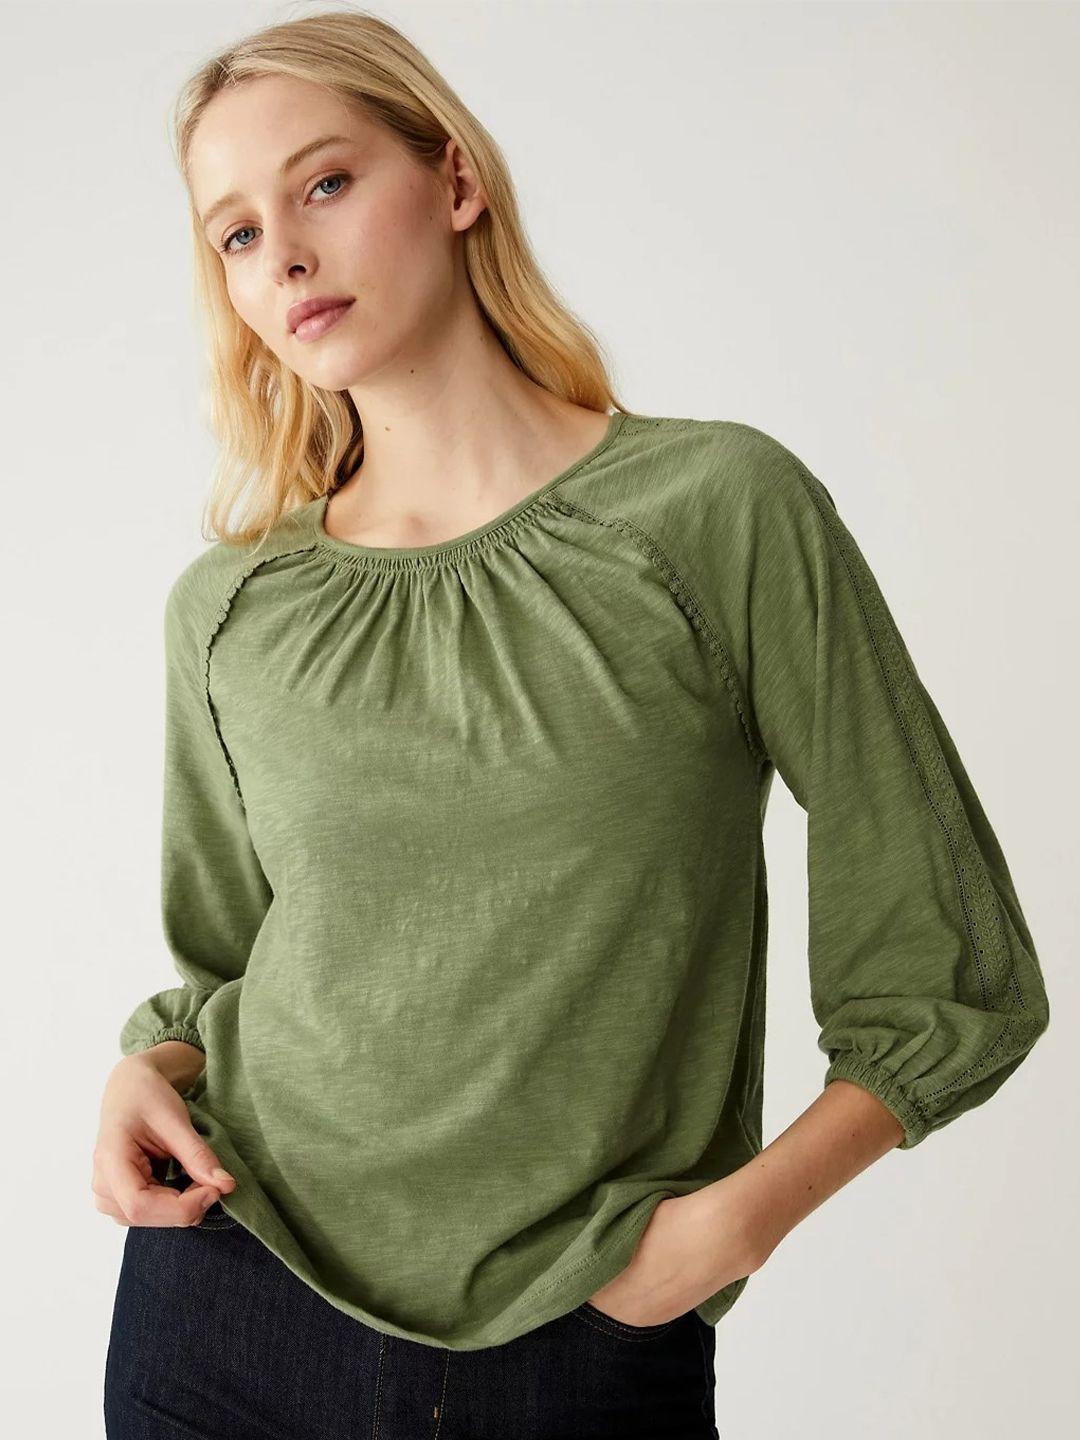 marks-&-spencer-puff-sleeves-cotton-top